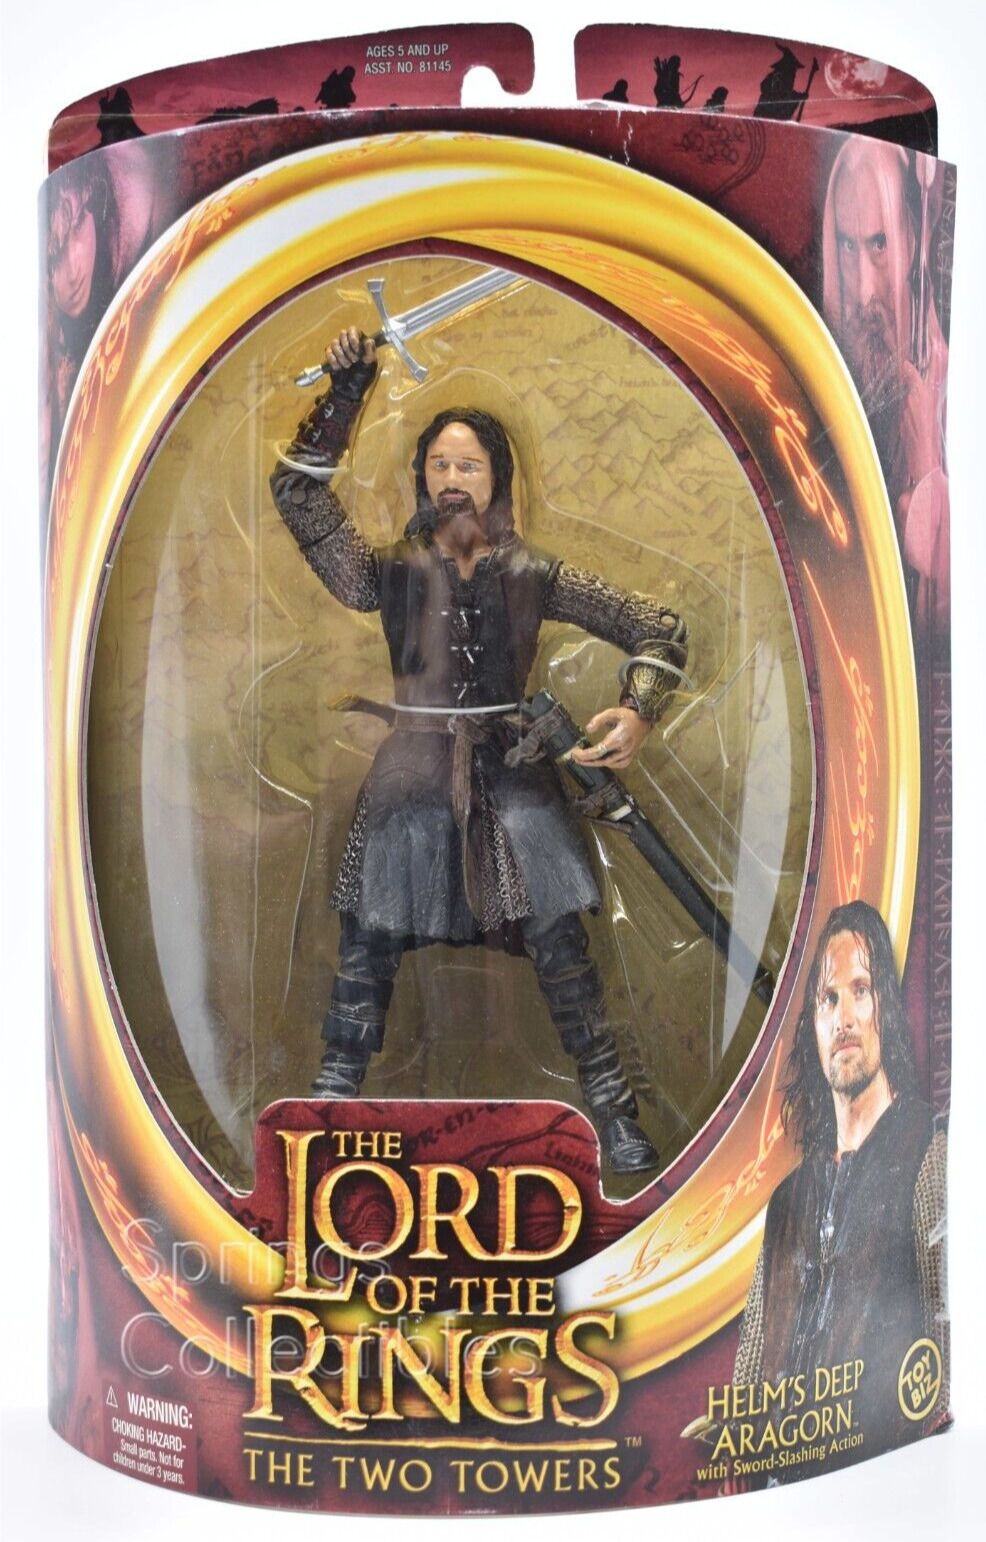 Helm's Deep Aragorn - Lord of the Rings Action Figure - 2002 Toy Biz